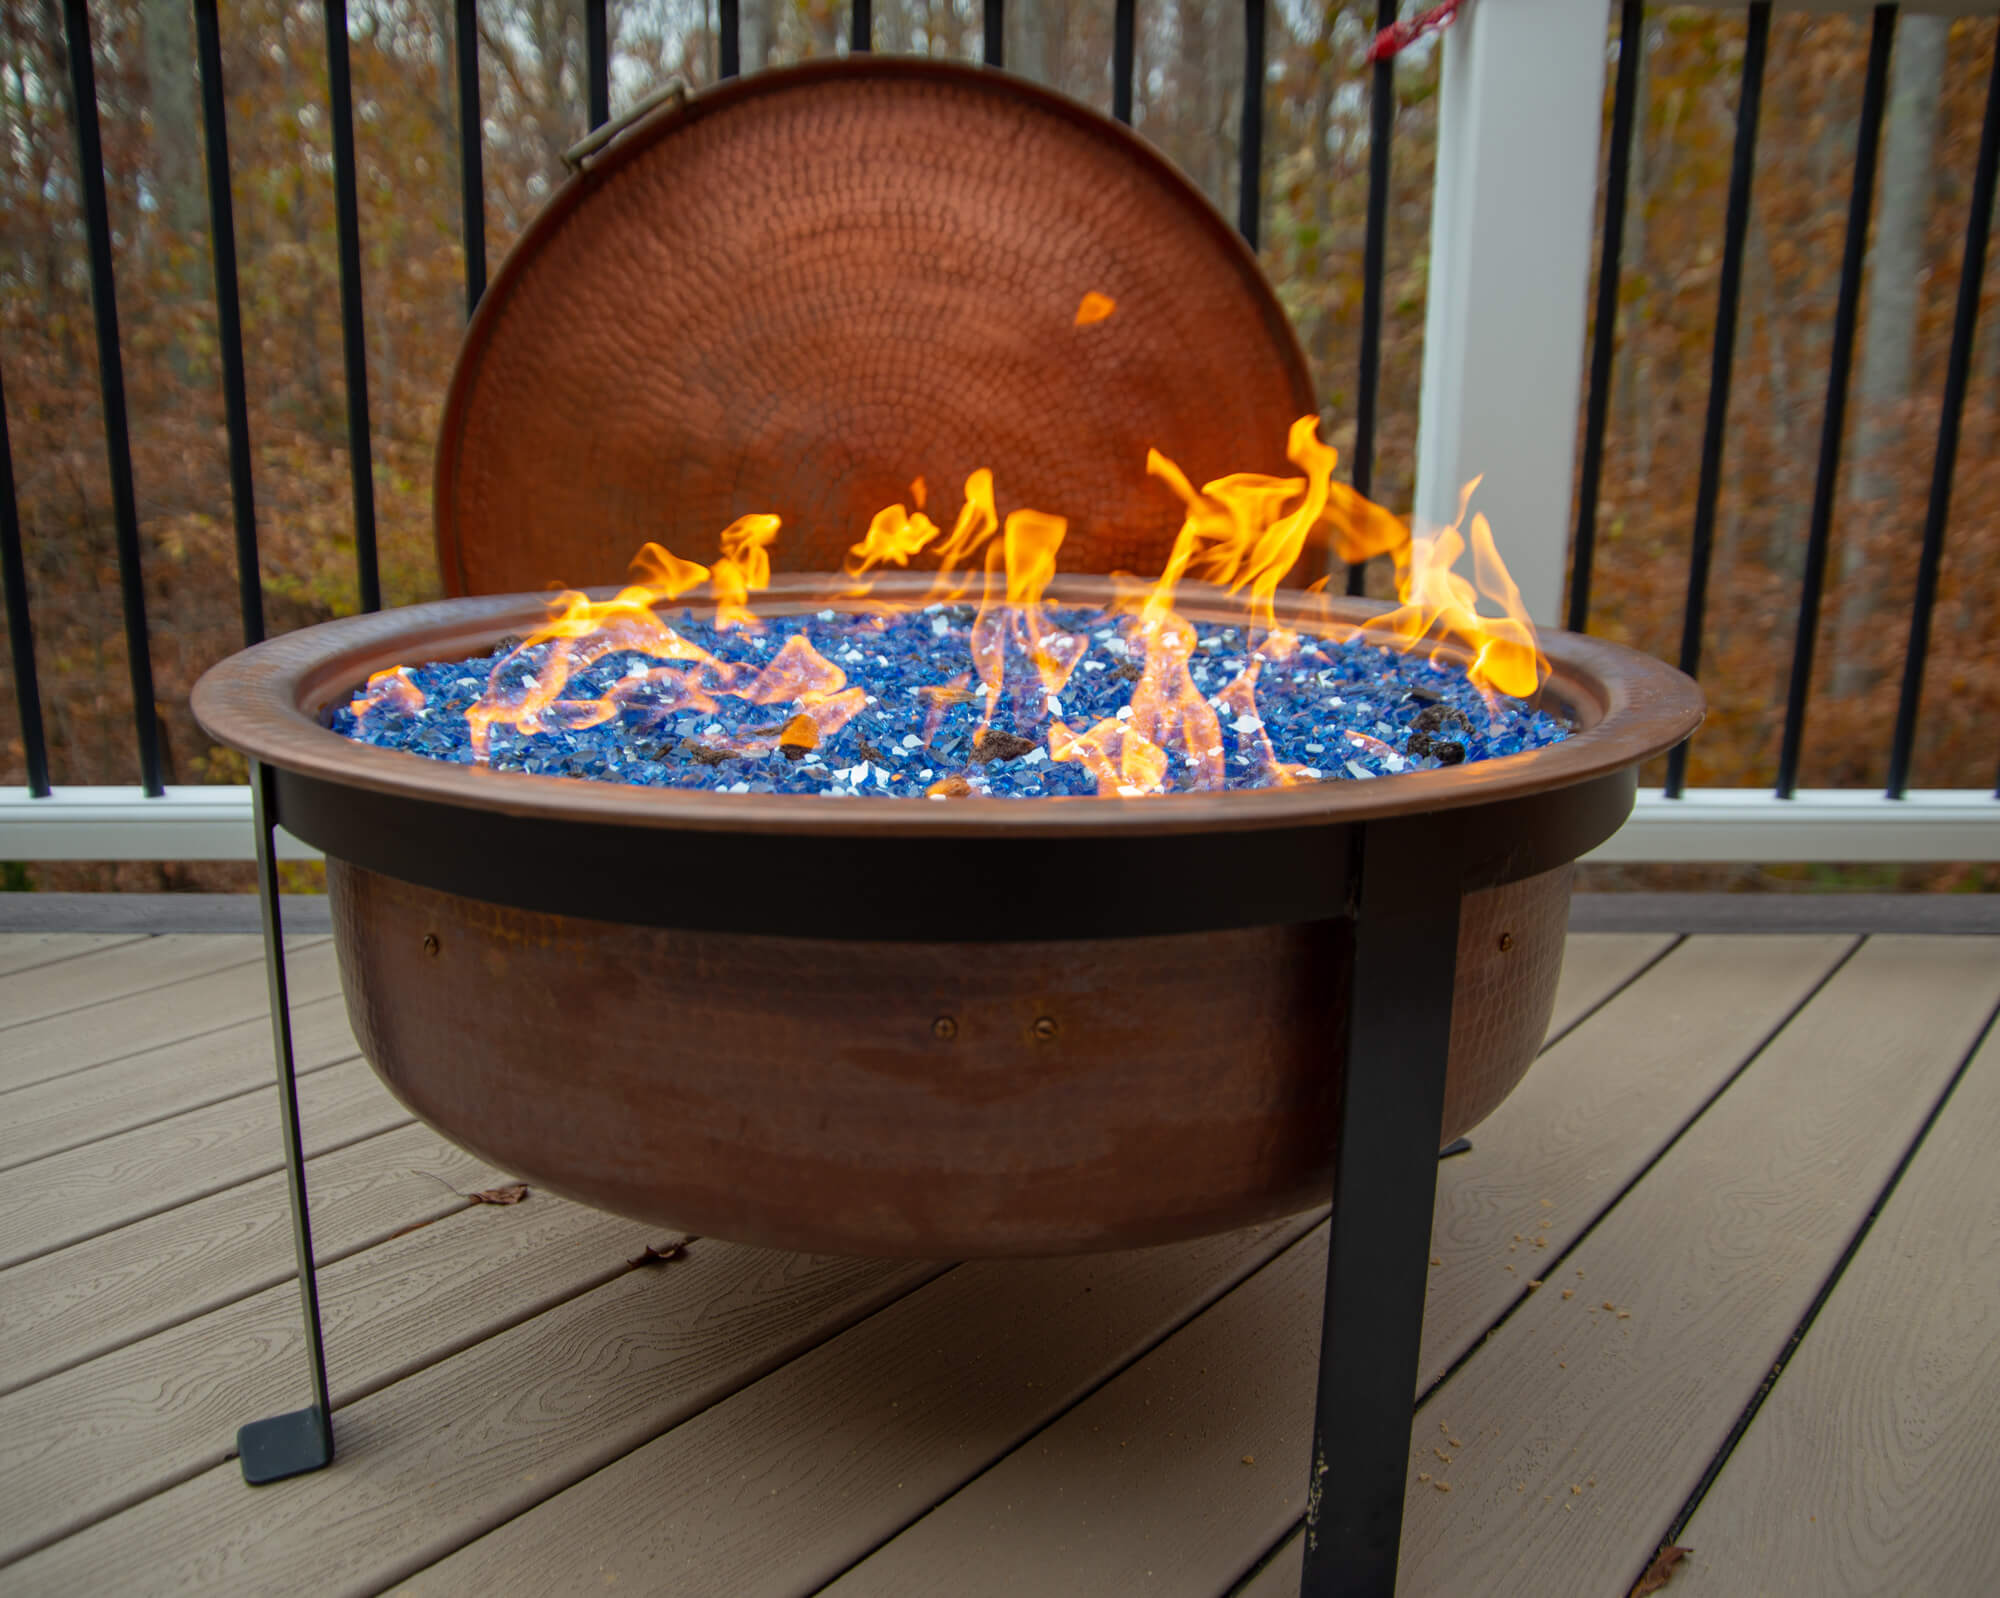 6 Ways To Put A Fire Pit On Wooden Deck, Can I Put A Fire Pit On My Composite Deck